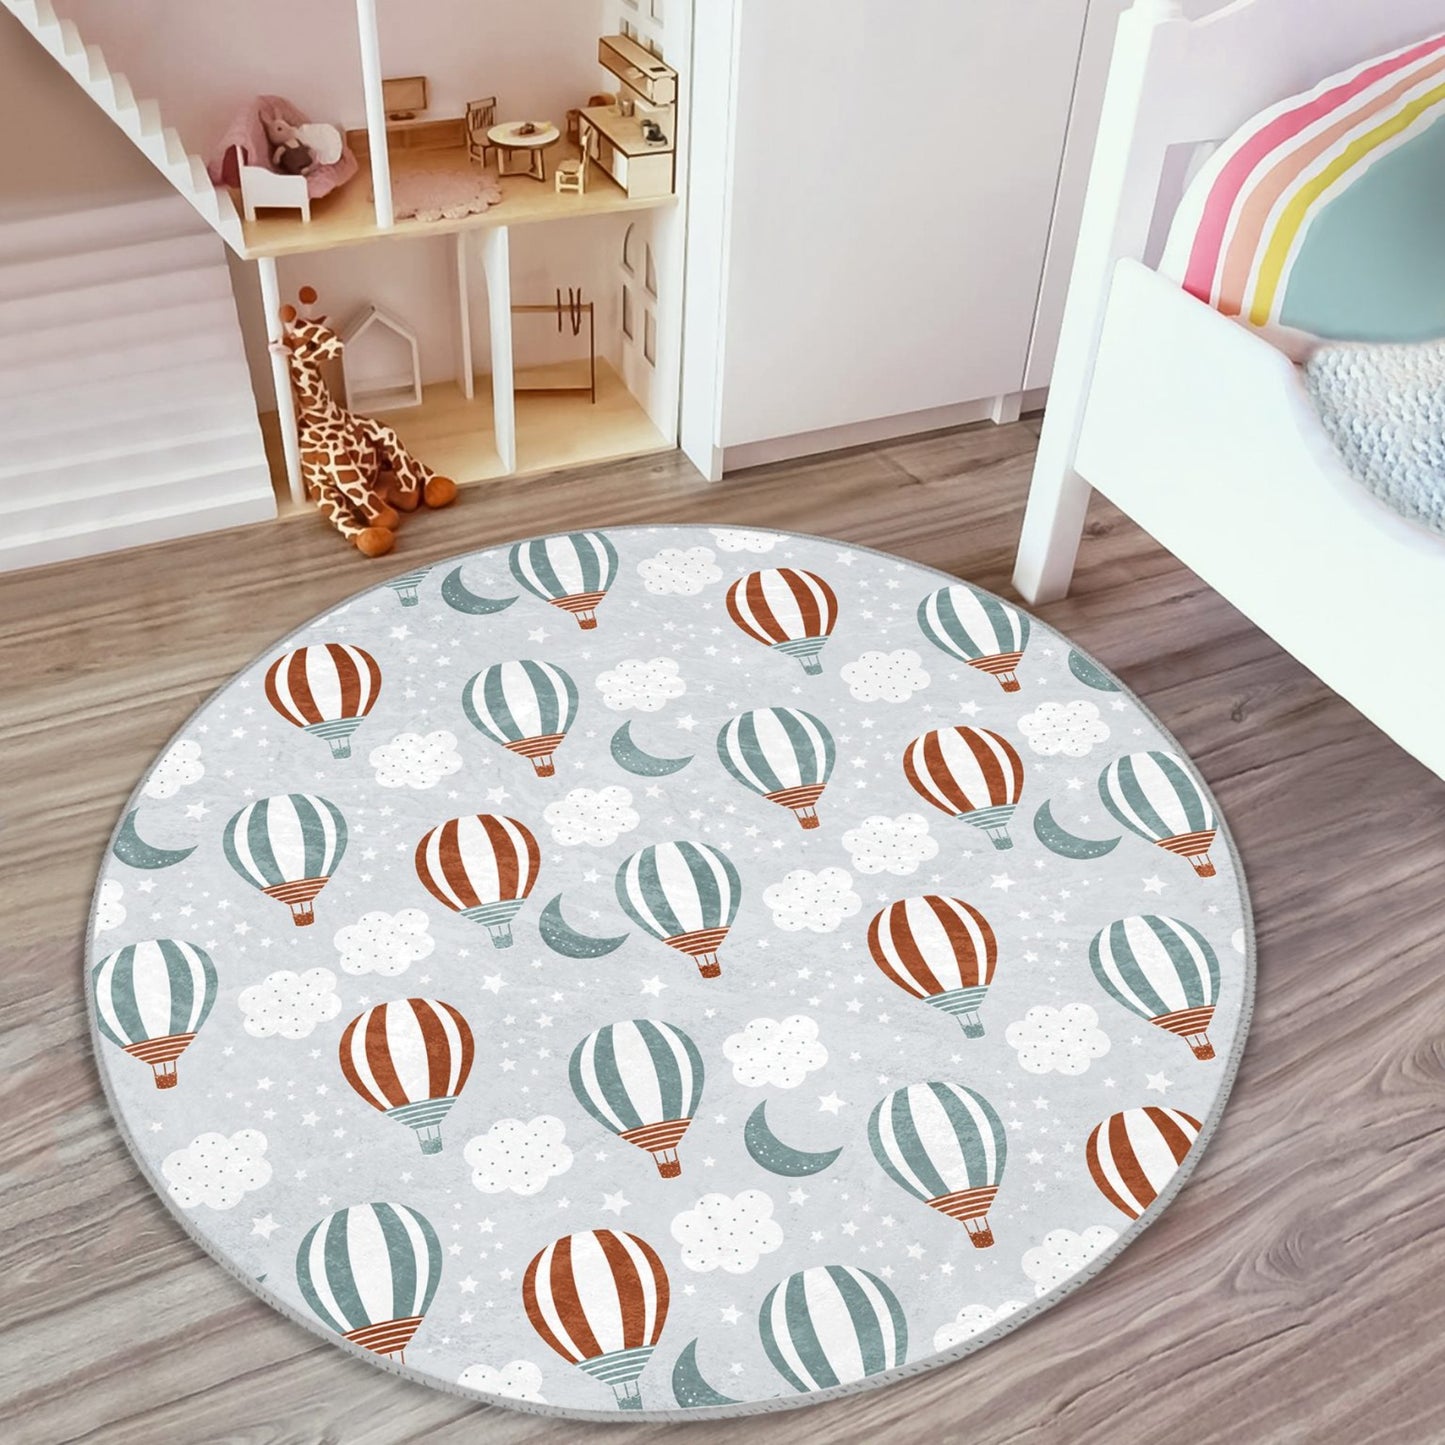 Rug with Adventure Theme for Kids' Play Area